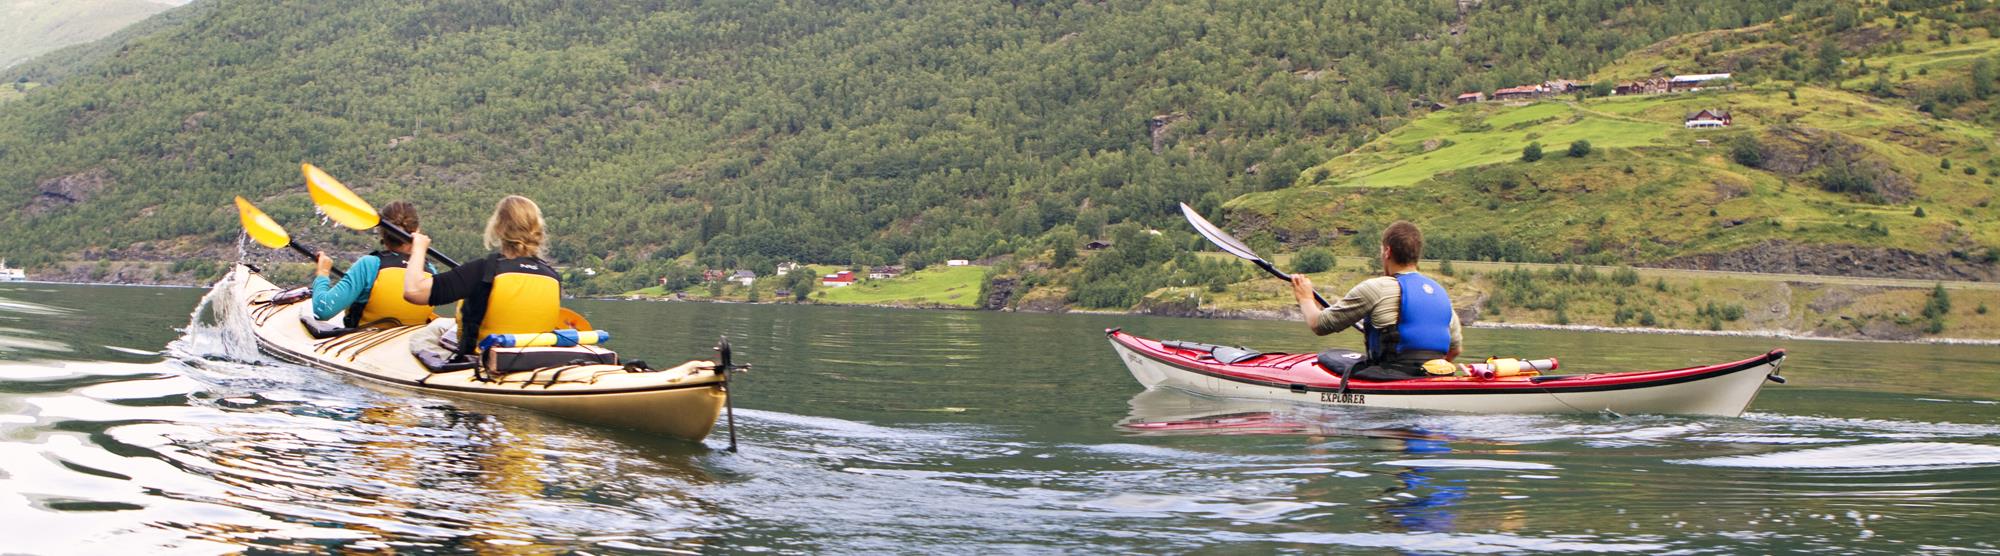 Kayaking in the fjords